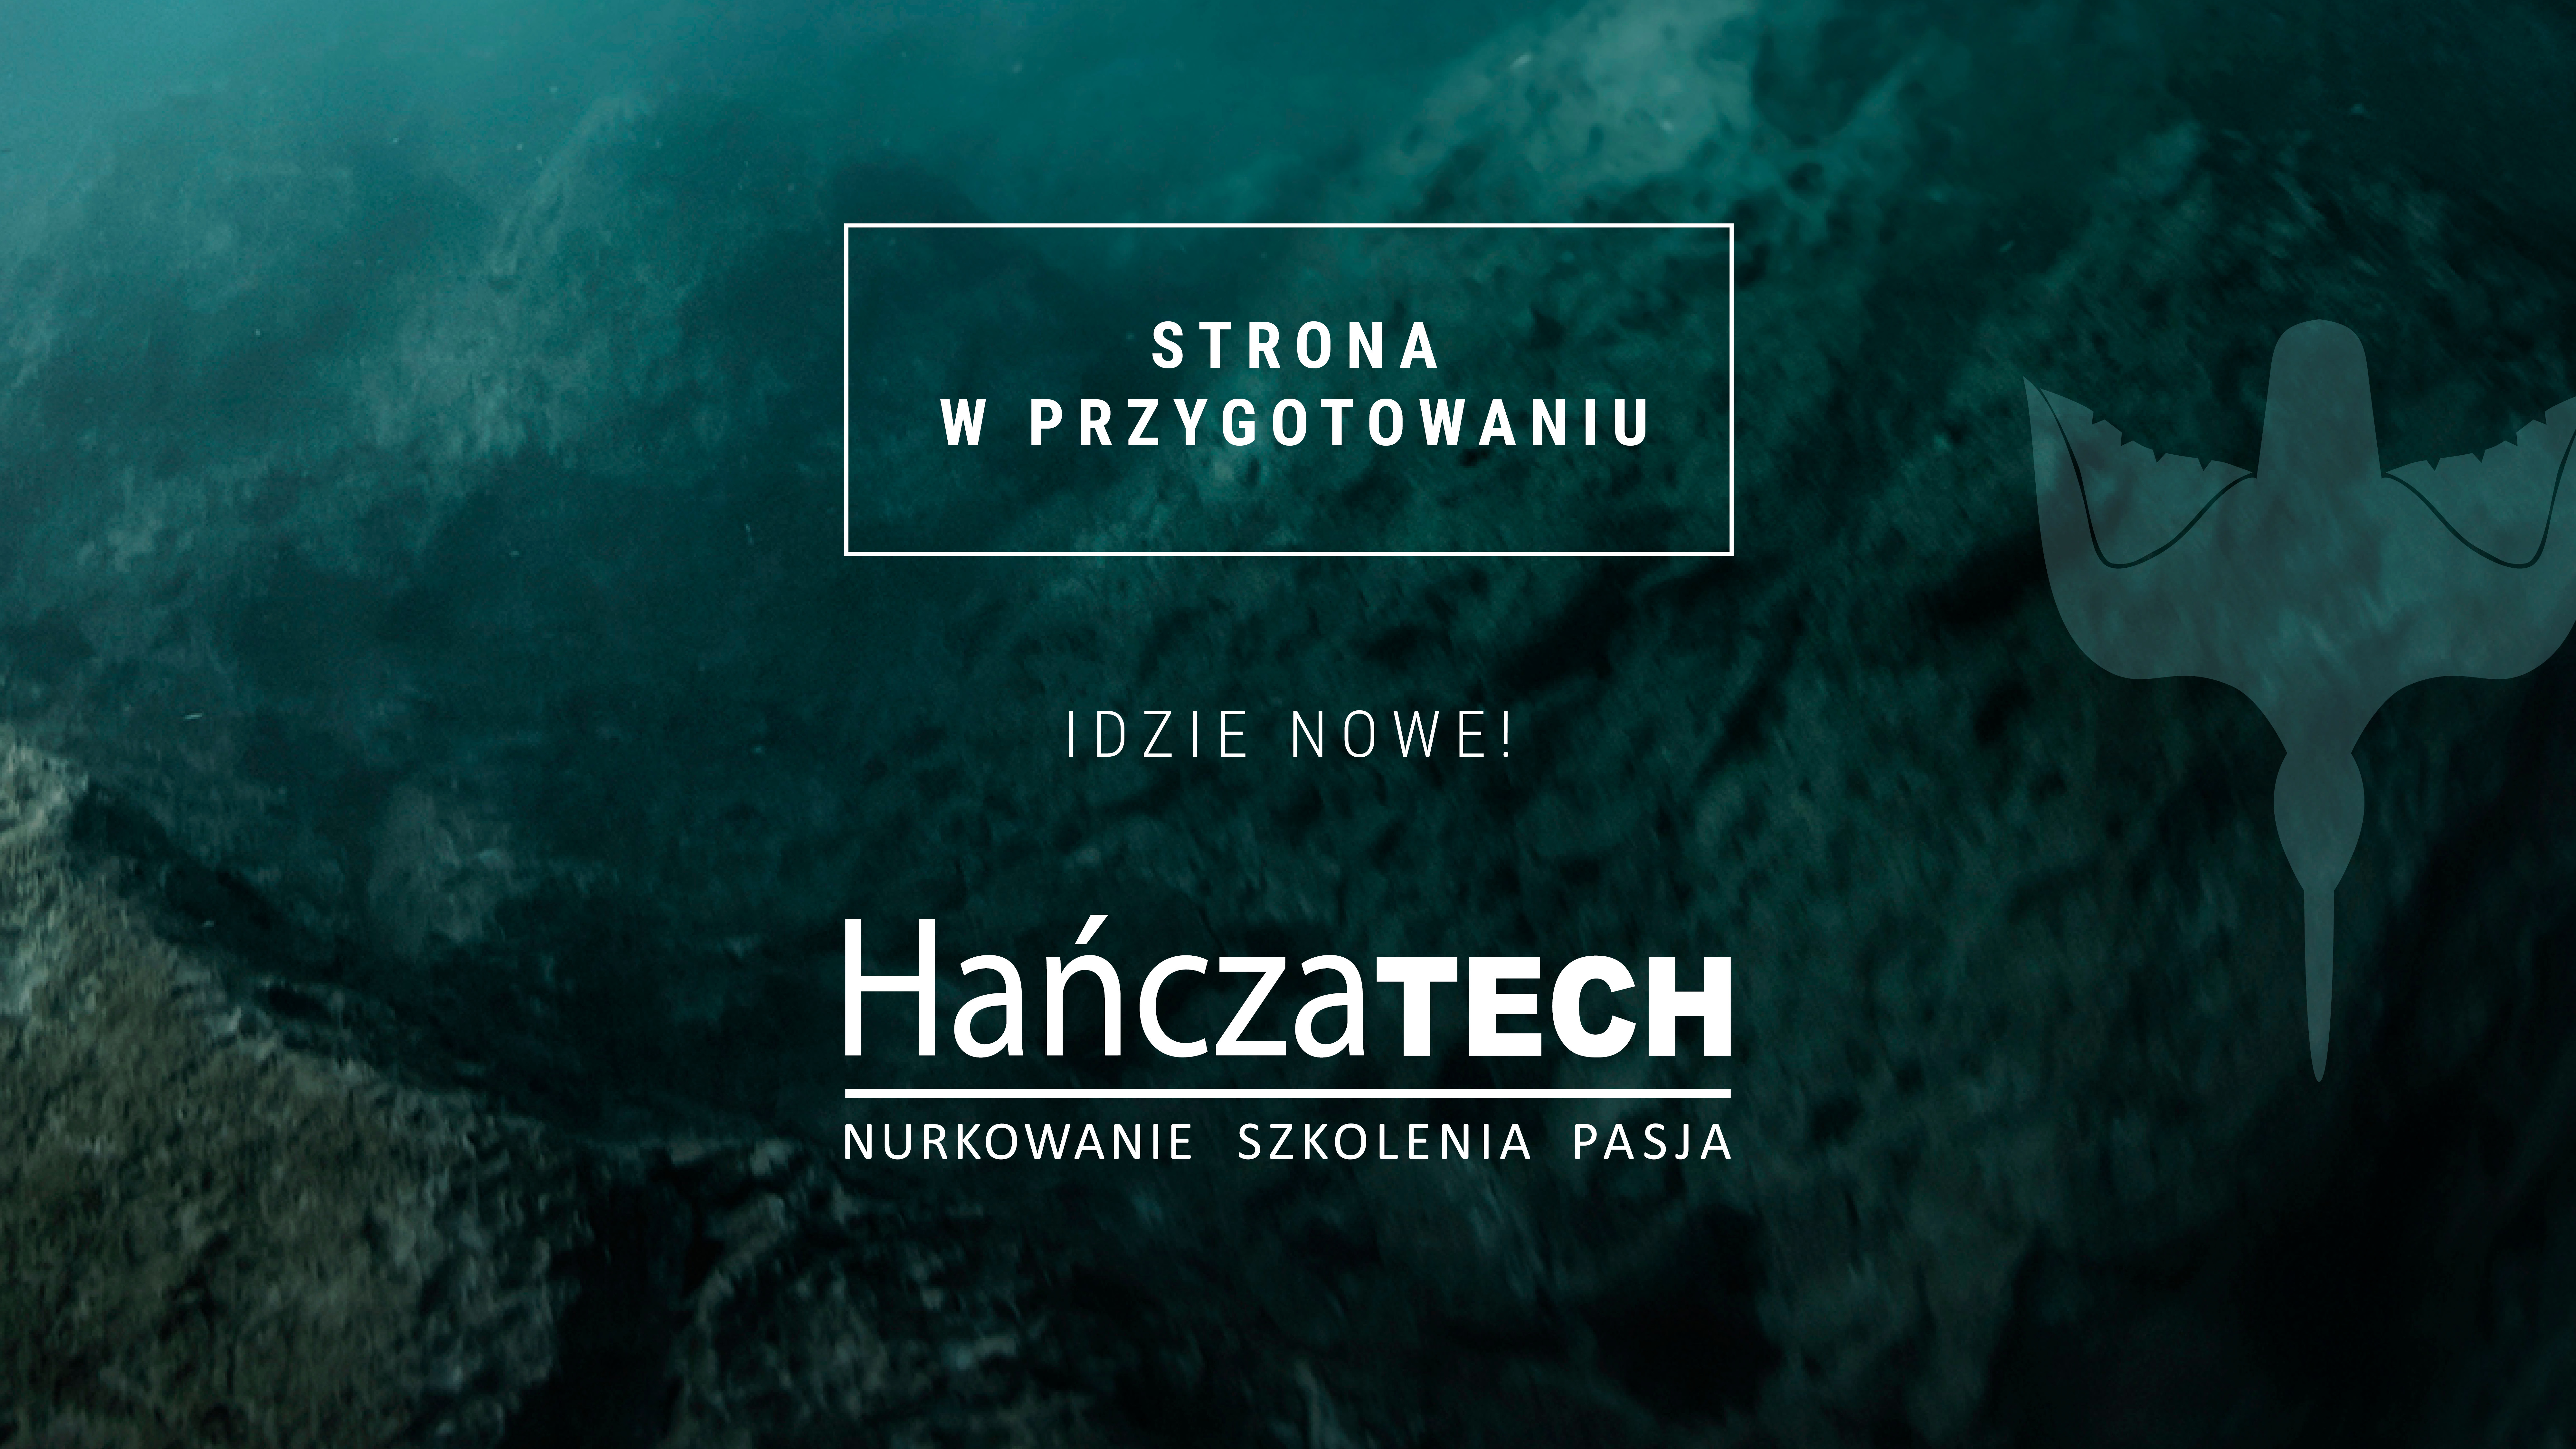 hosted by Hanczatech